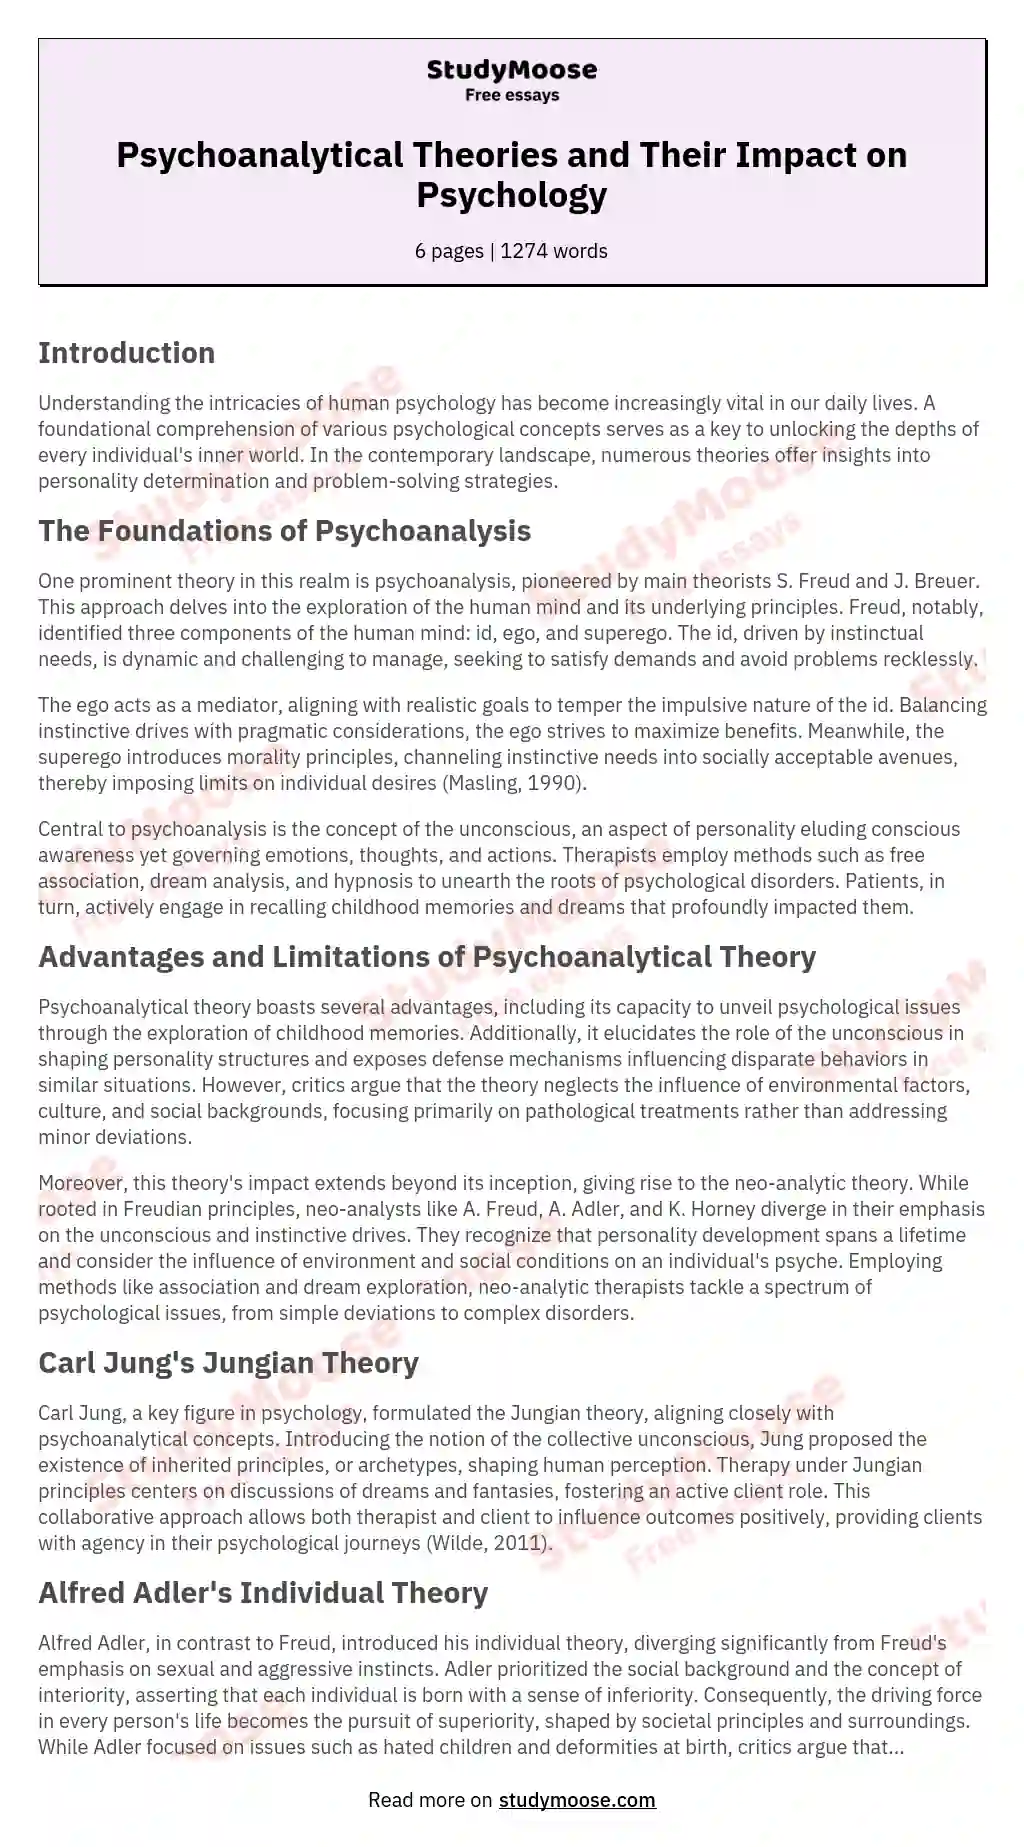 Psychoanalytical Theories and Their Impact on Psychology essay